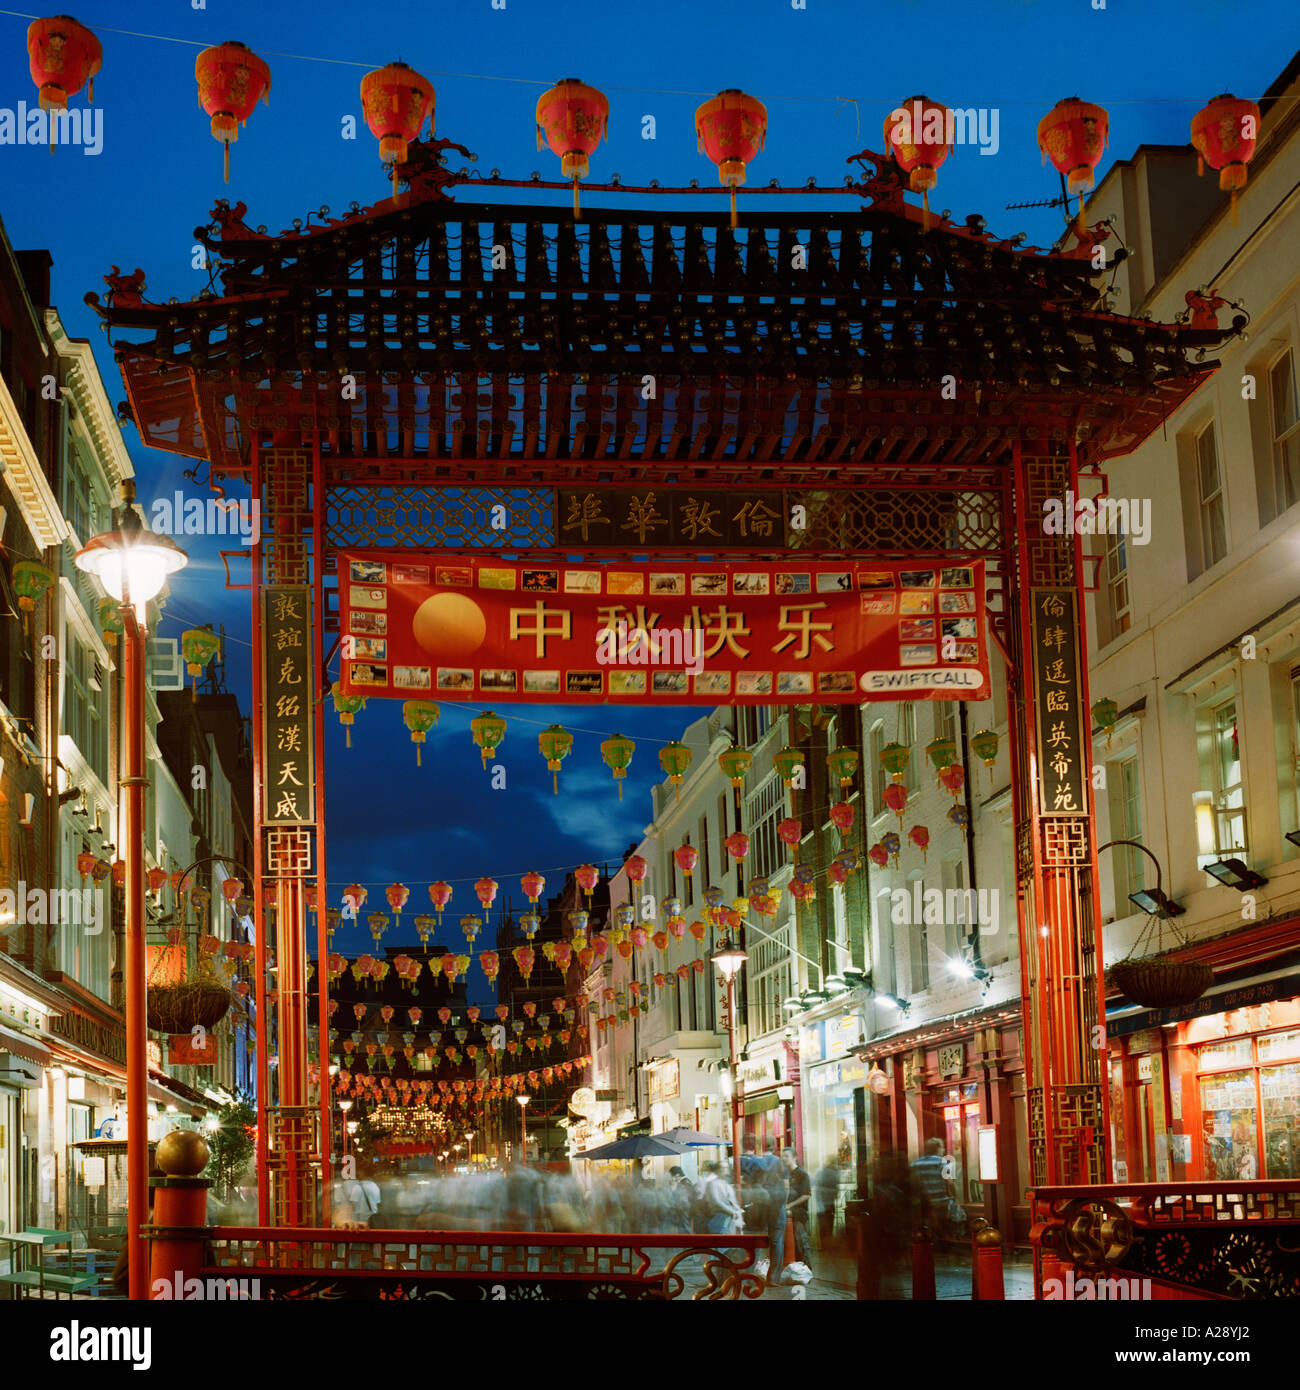 Dusk shot of Chinatown, Gerrard Street, Westminster, London, during Chinese New Year; inc. ceremonial gate, lanterns, flags, shop-fronts Stock Photo